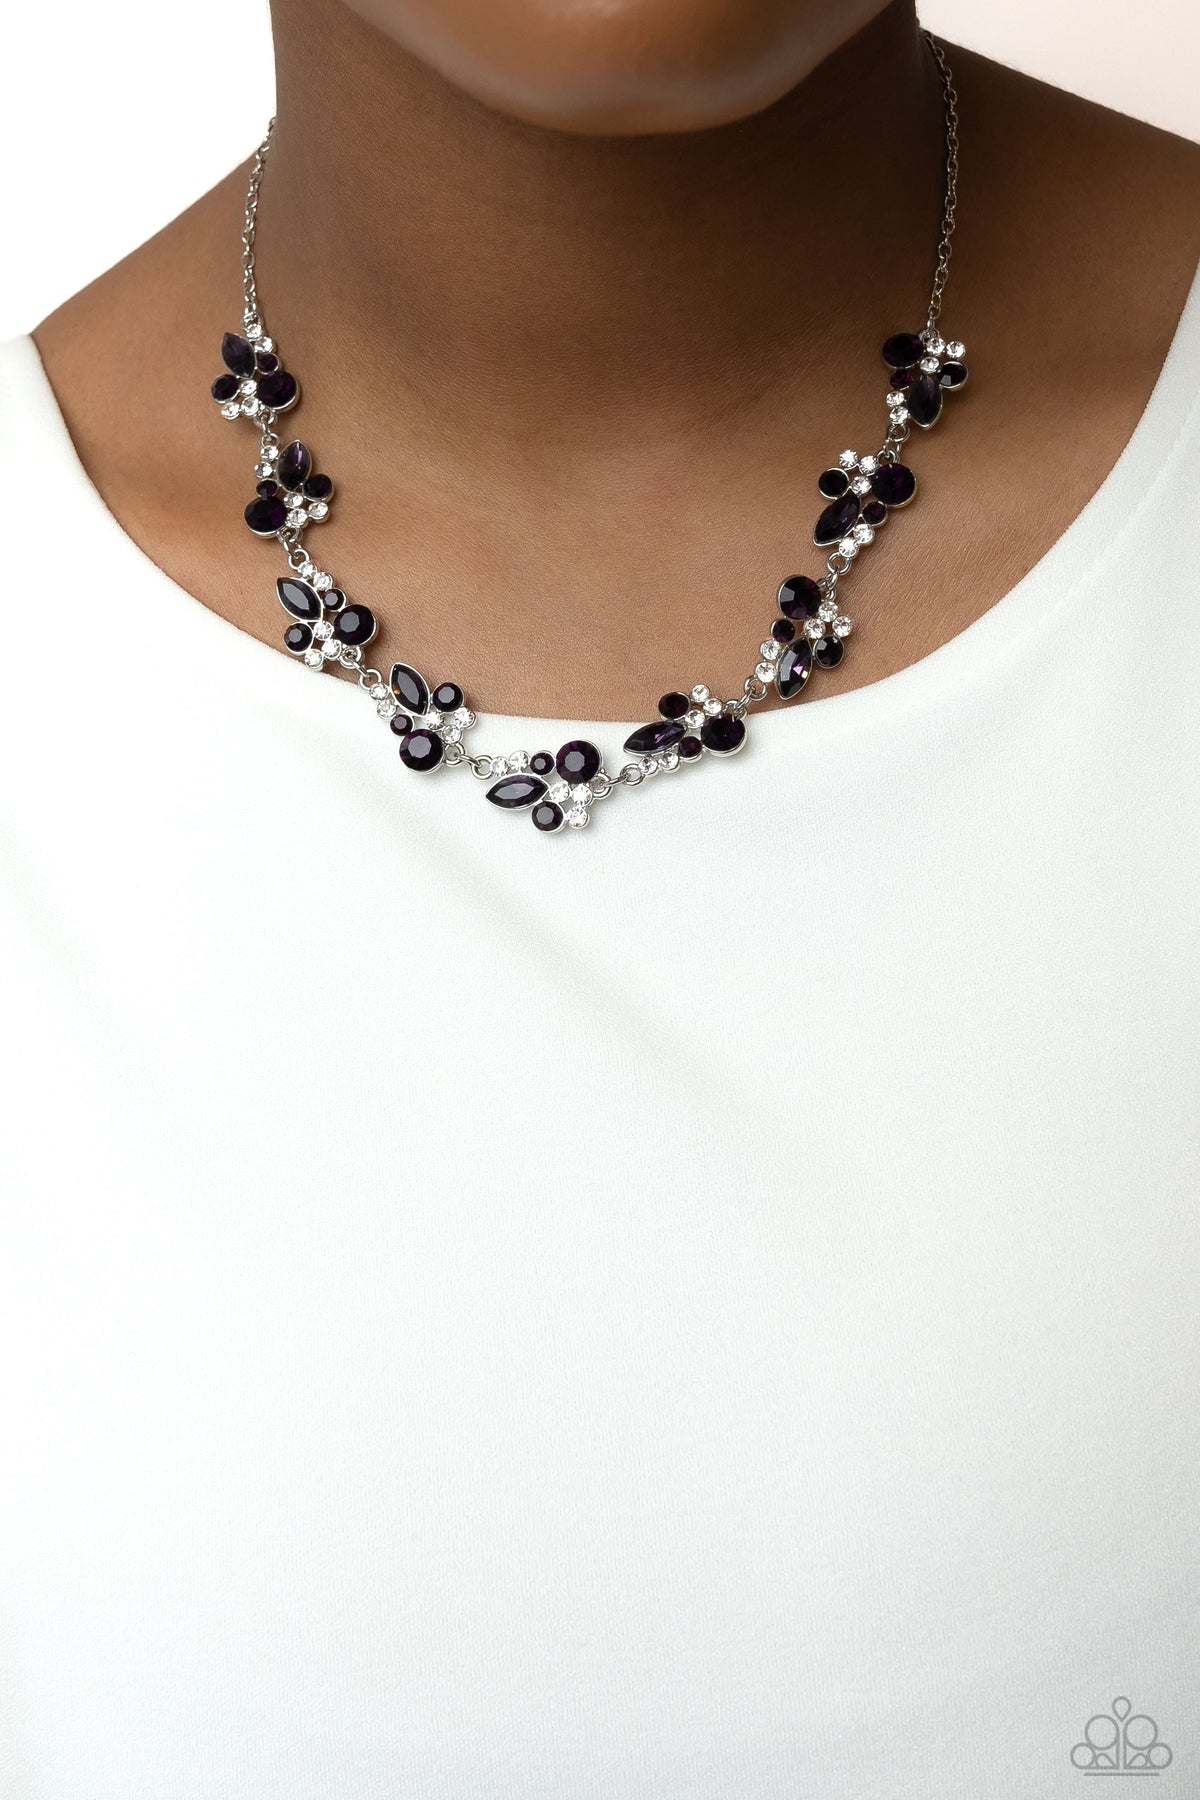 Swimming in Sparkles Purple Rhinestone Necklace - Paparazzi Accessories-on model - CarasShop.com - $5 Jewelry by Cara Jewels